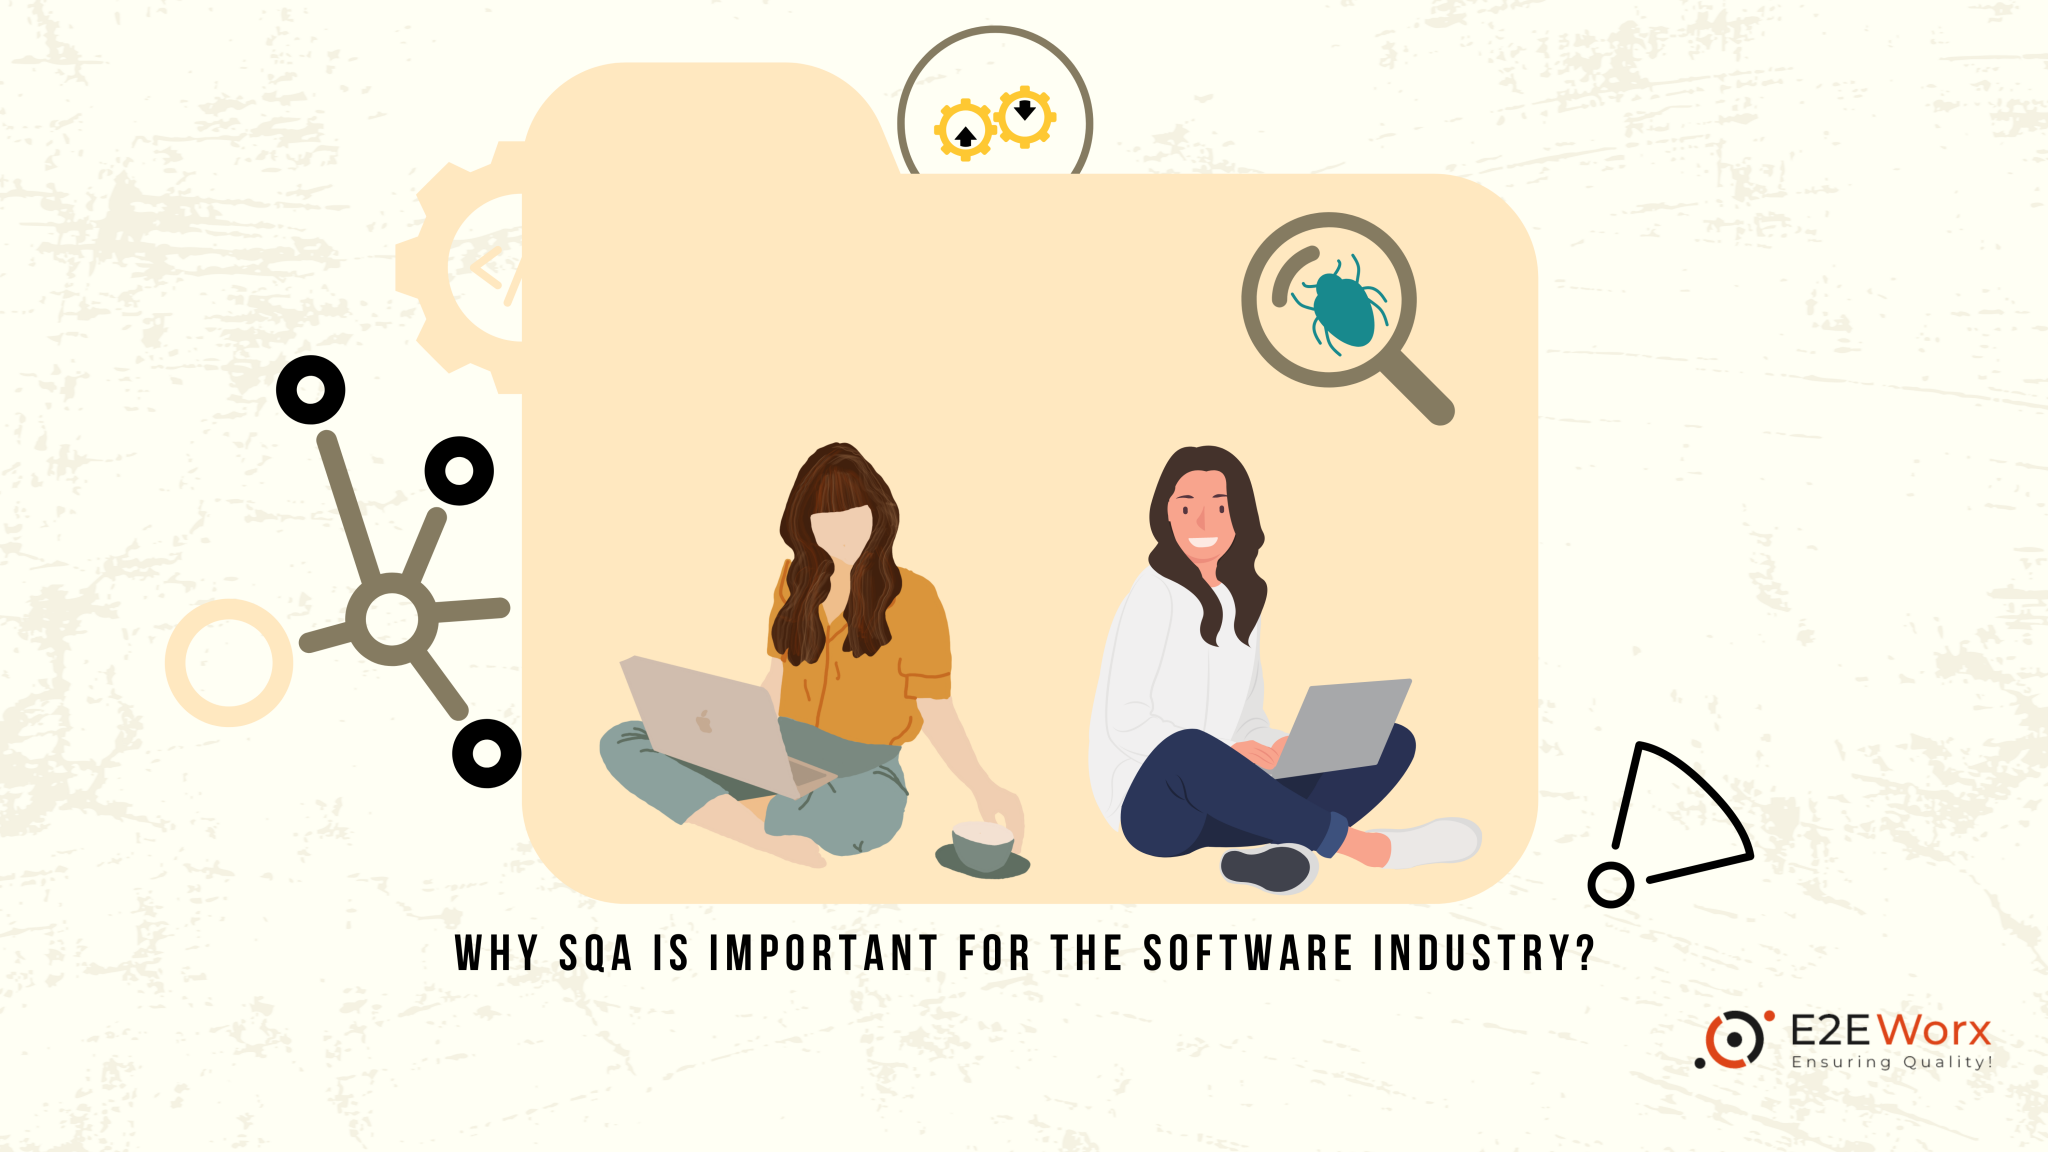 Why Software quality assurance is important for software industry - E2EWorx